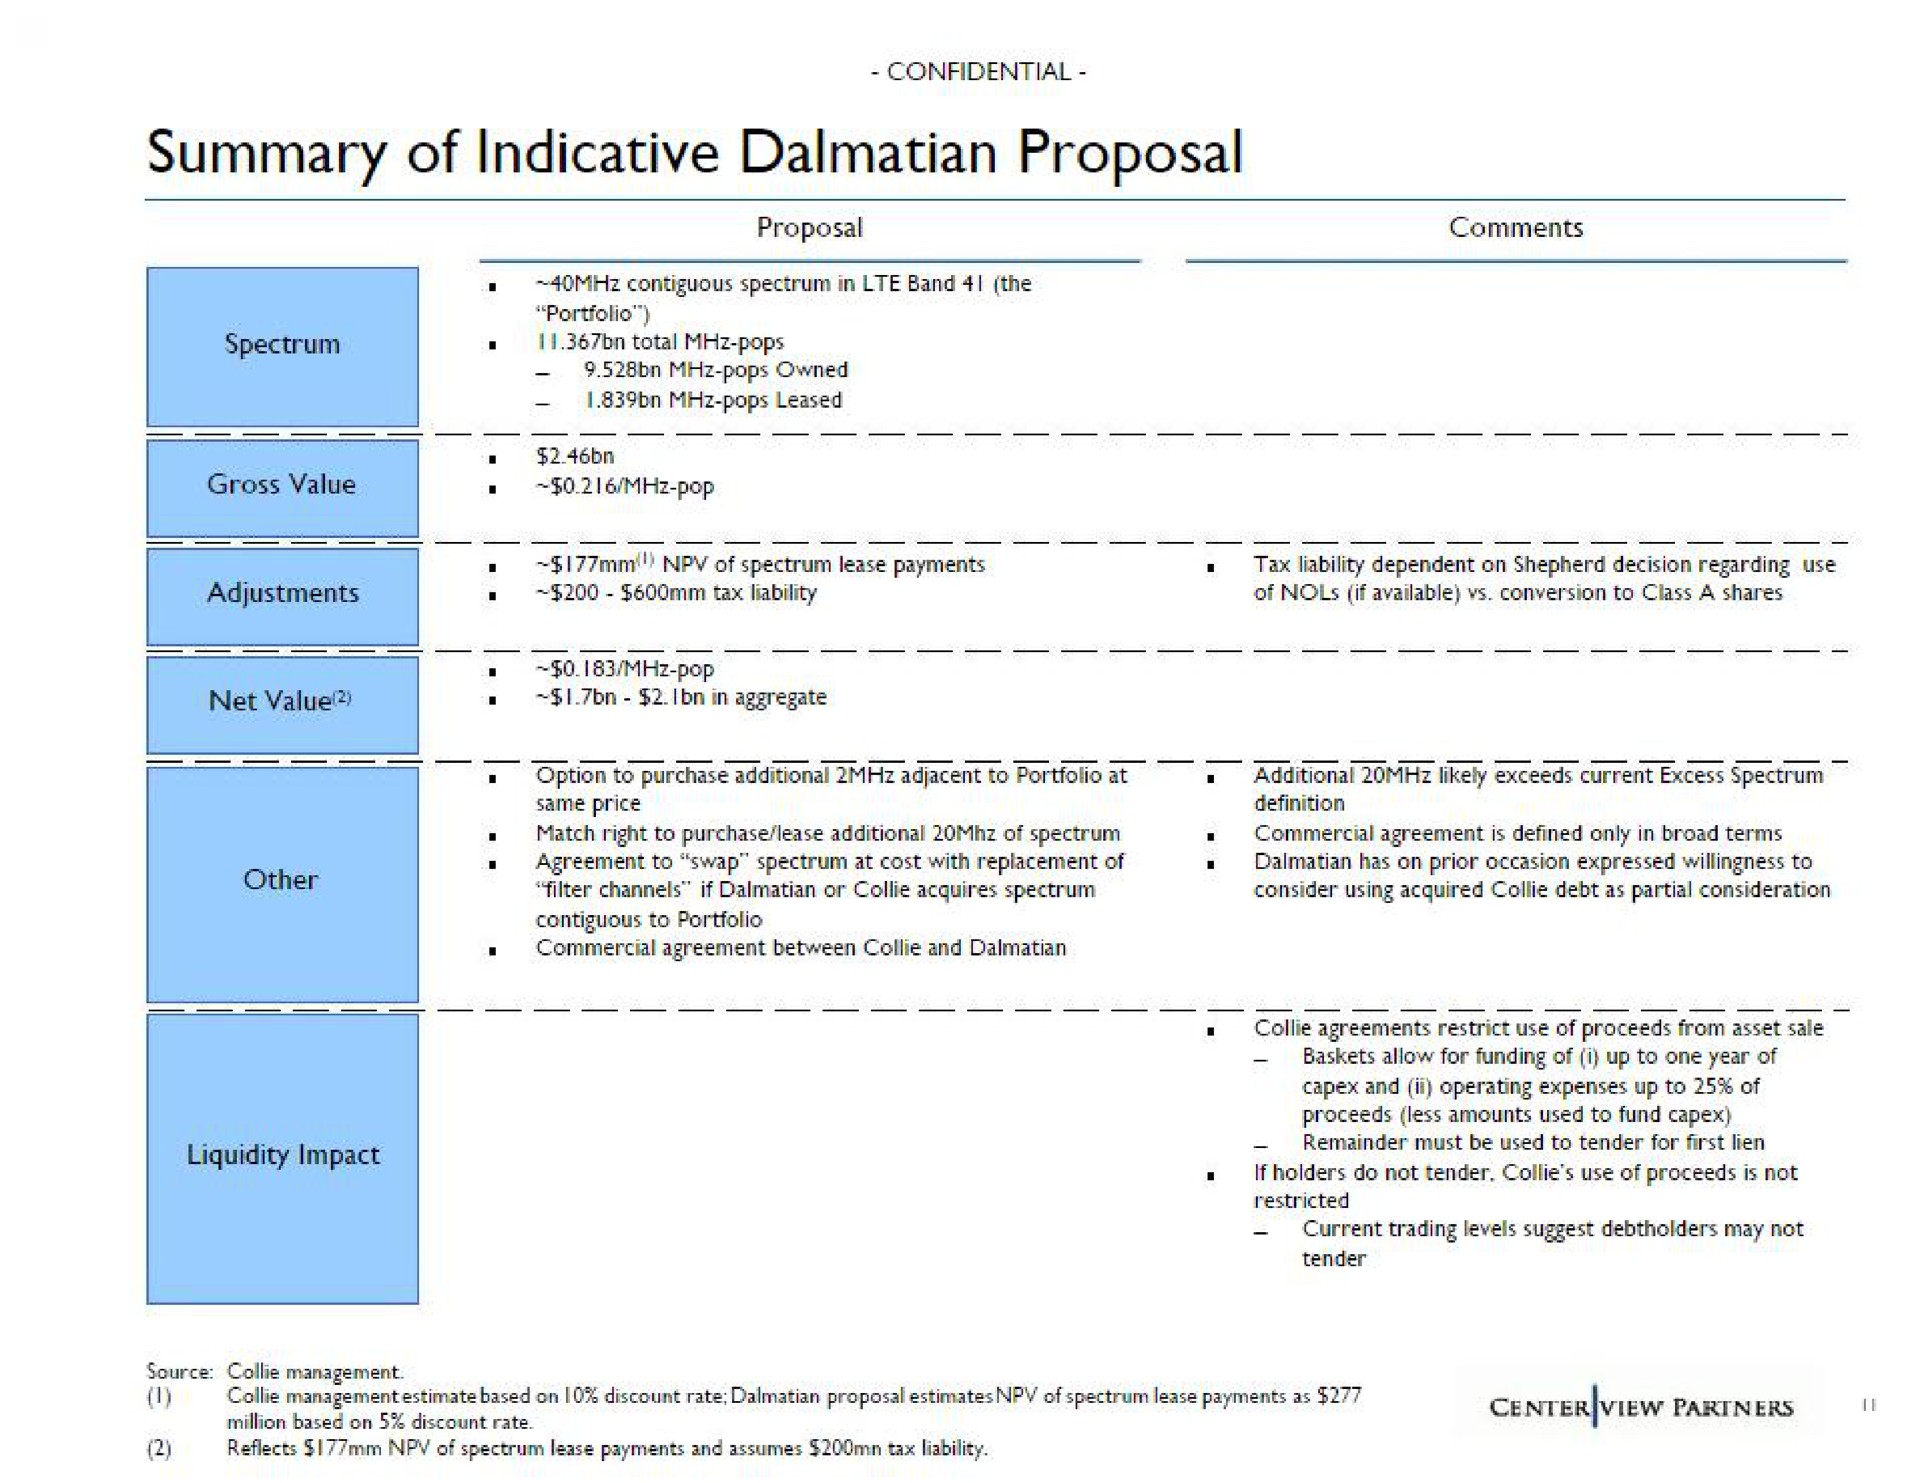 summary of indicative proposal | Centerview Partners